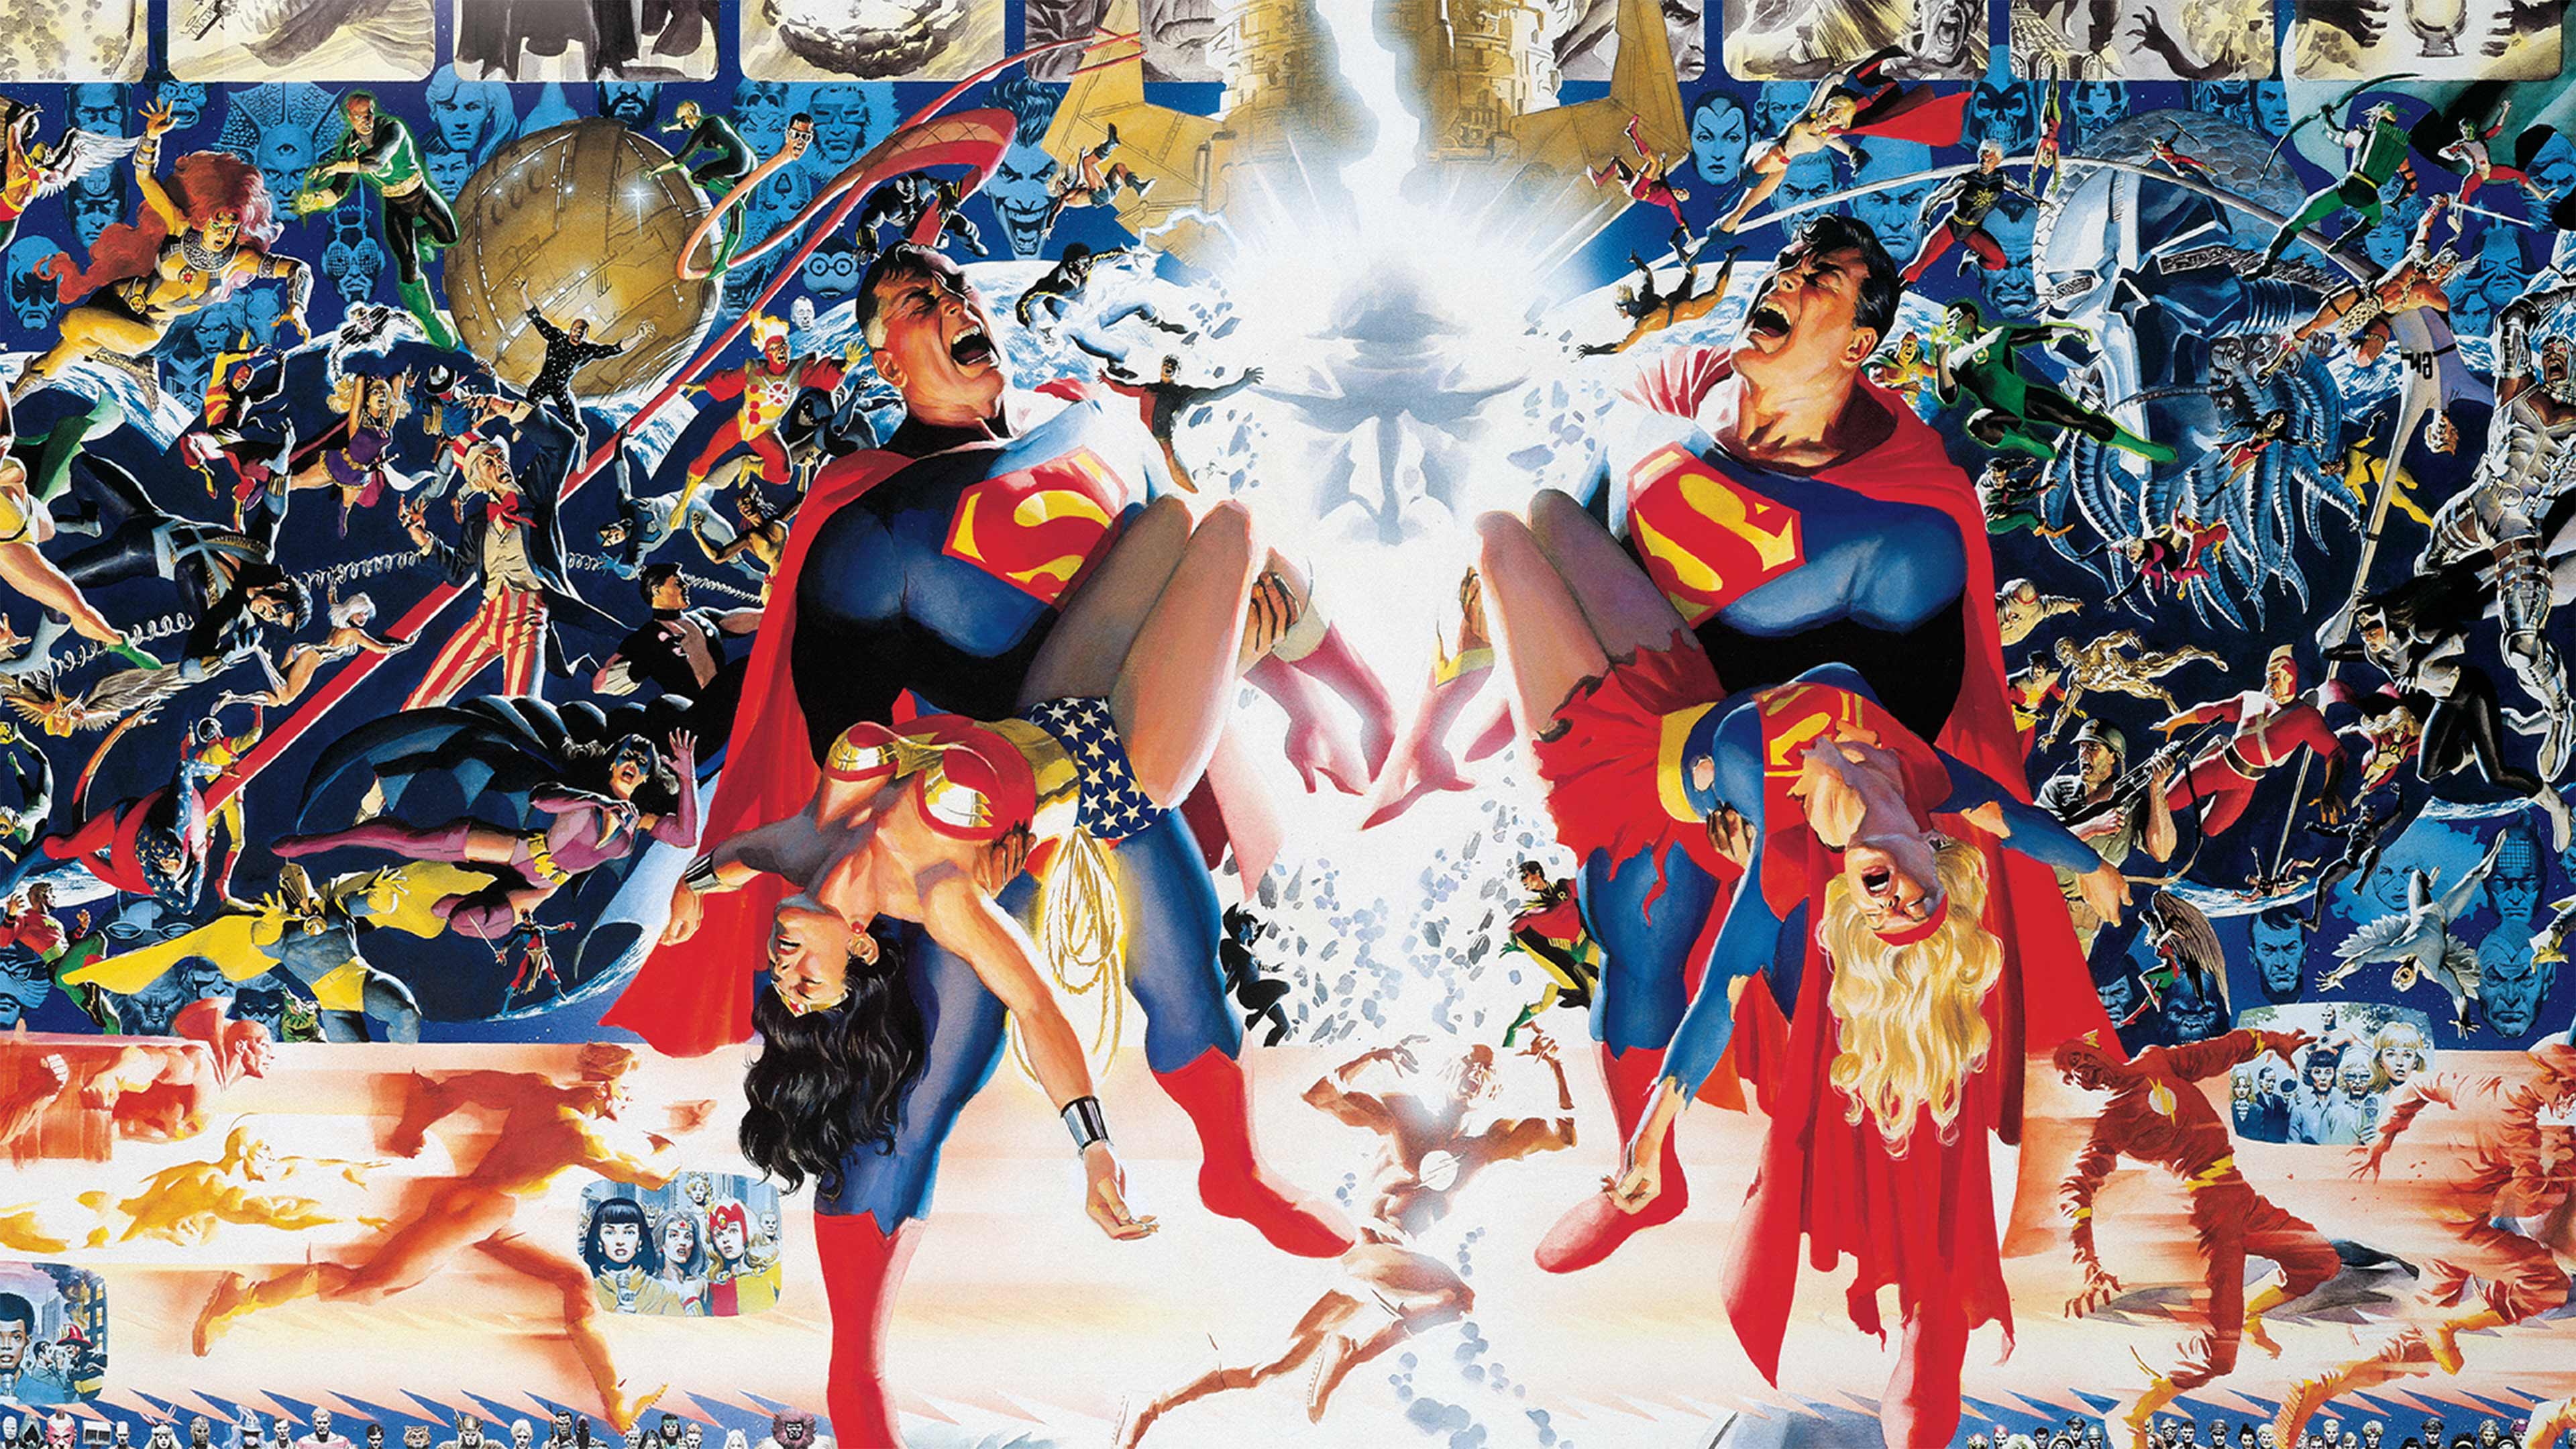 7 Things You Should Know Before Reading CRISIS ON INFINITE EARTHS